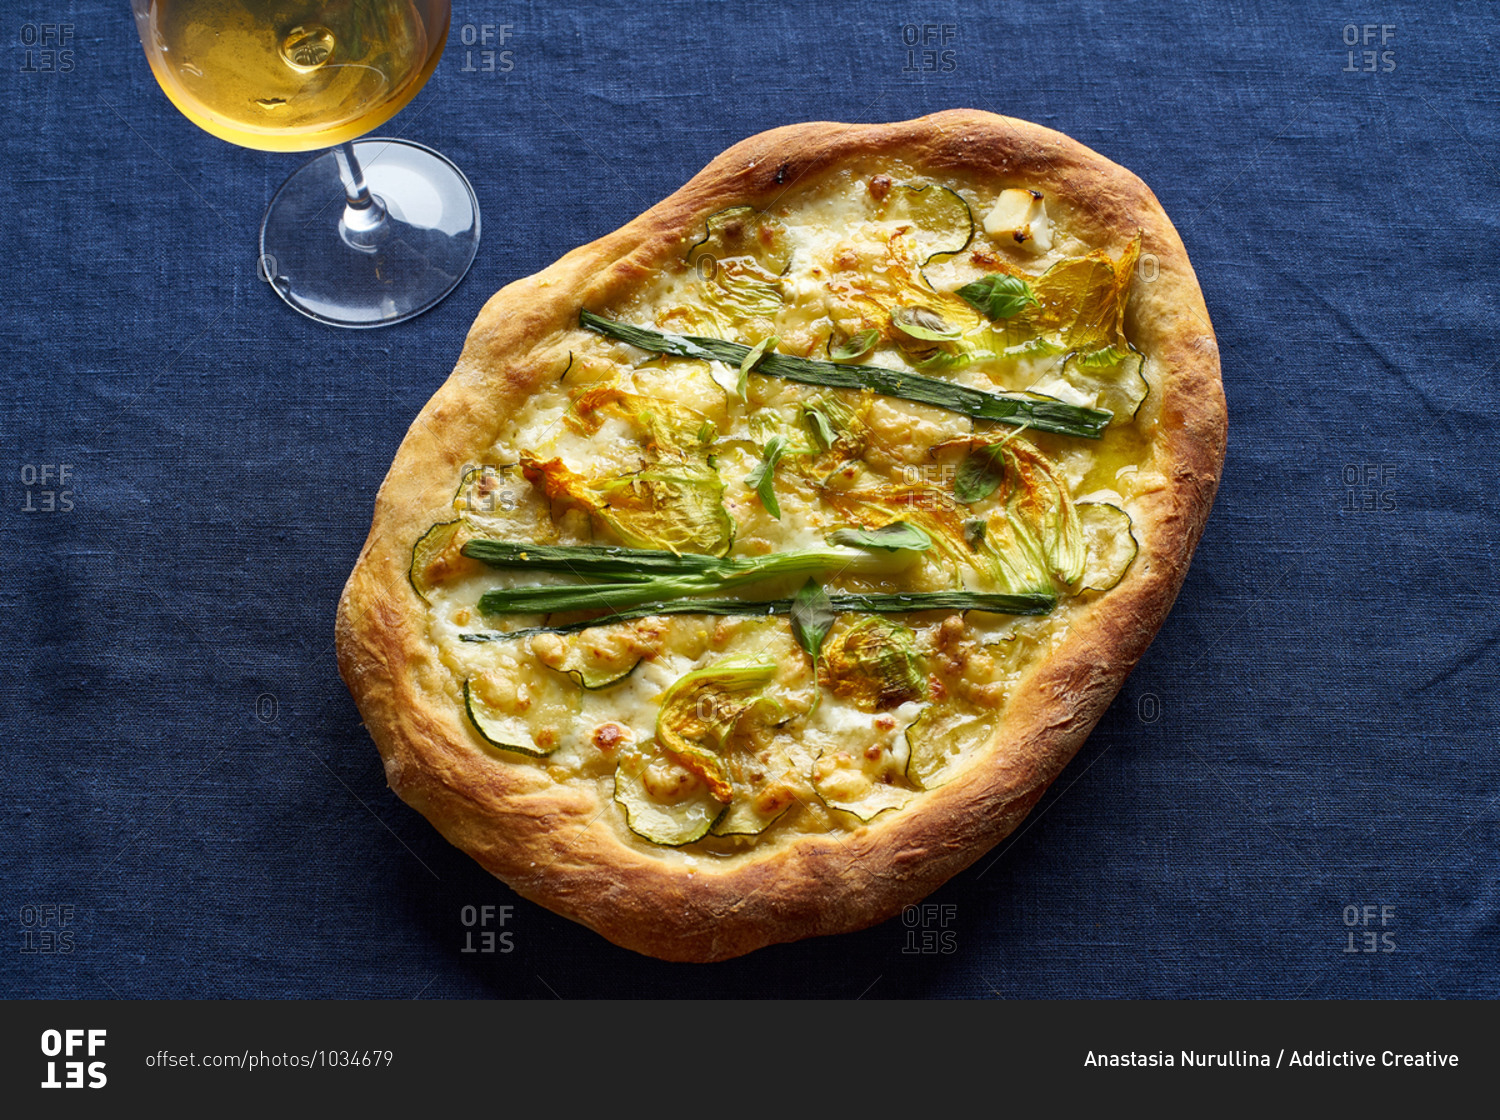 Vegetarian pizza with zucchini flowers, onion, courgette and cheese served with a glass of orange wine